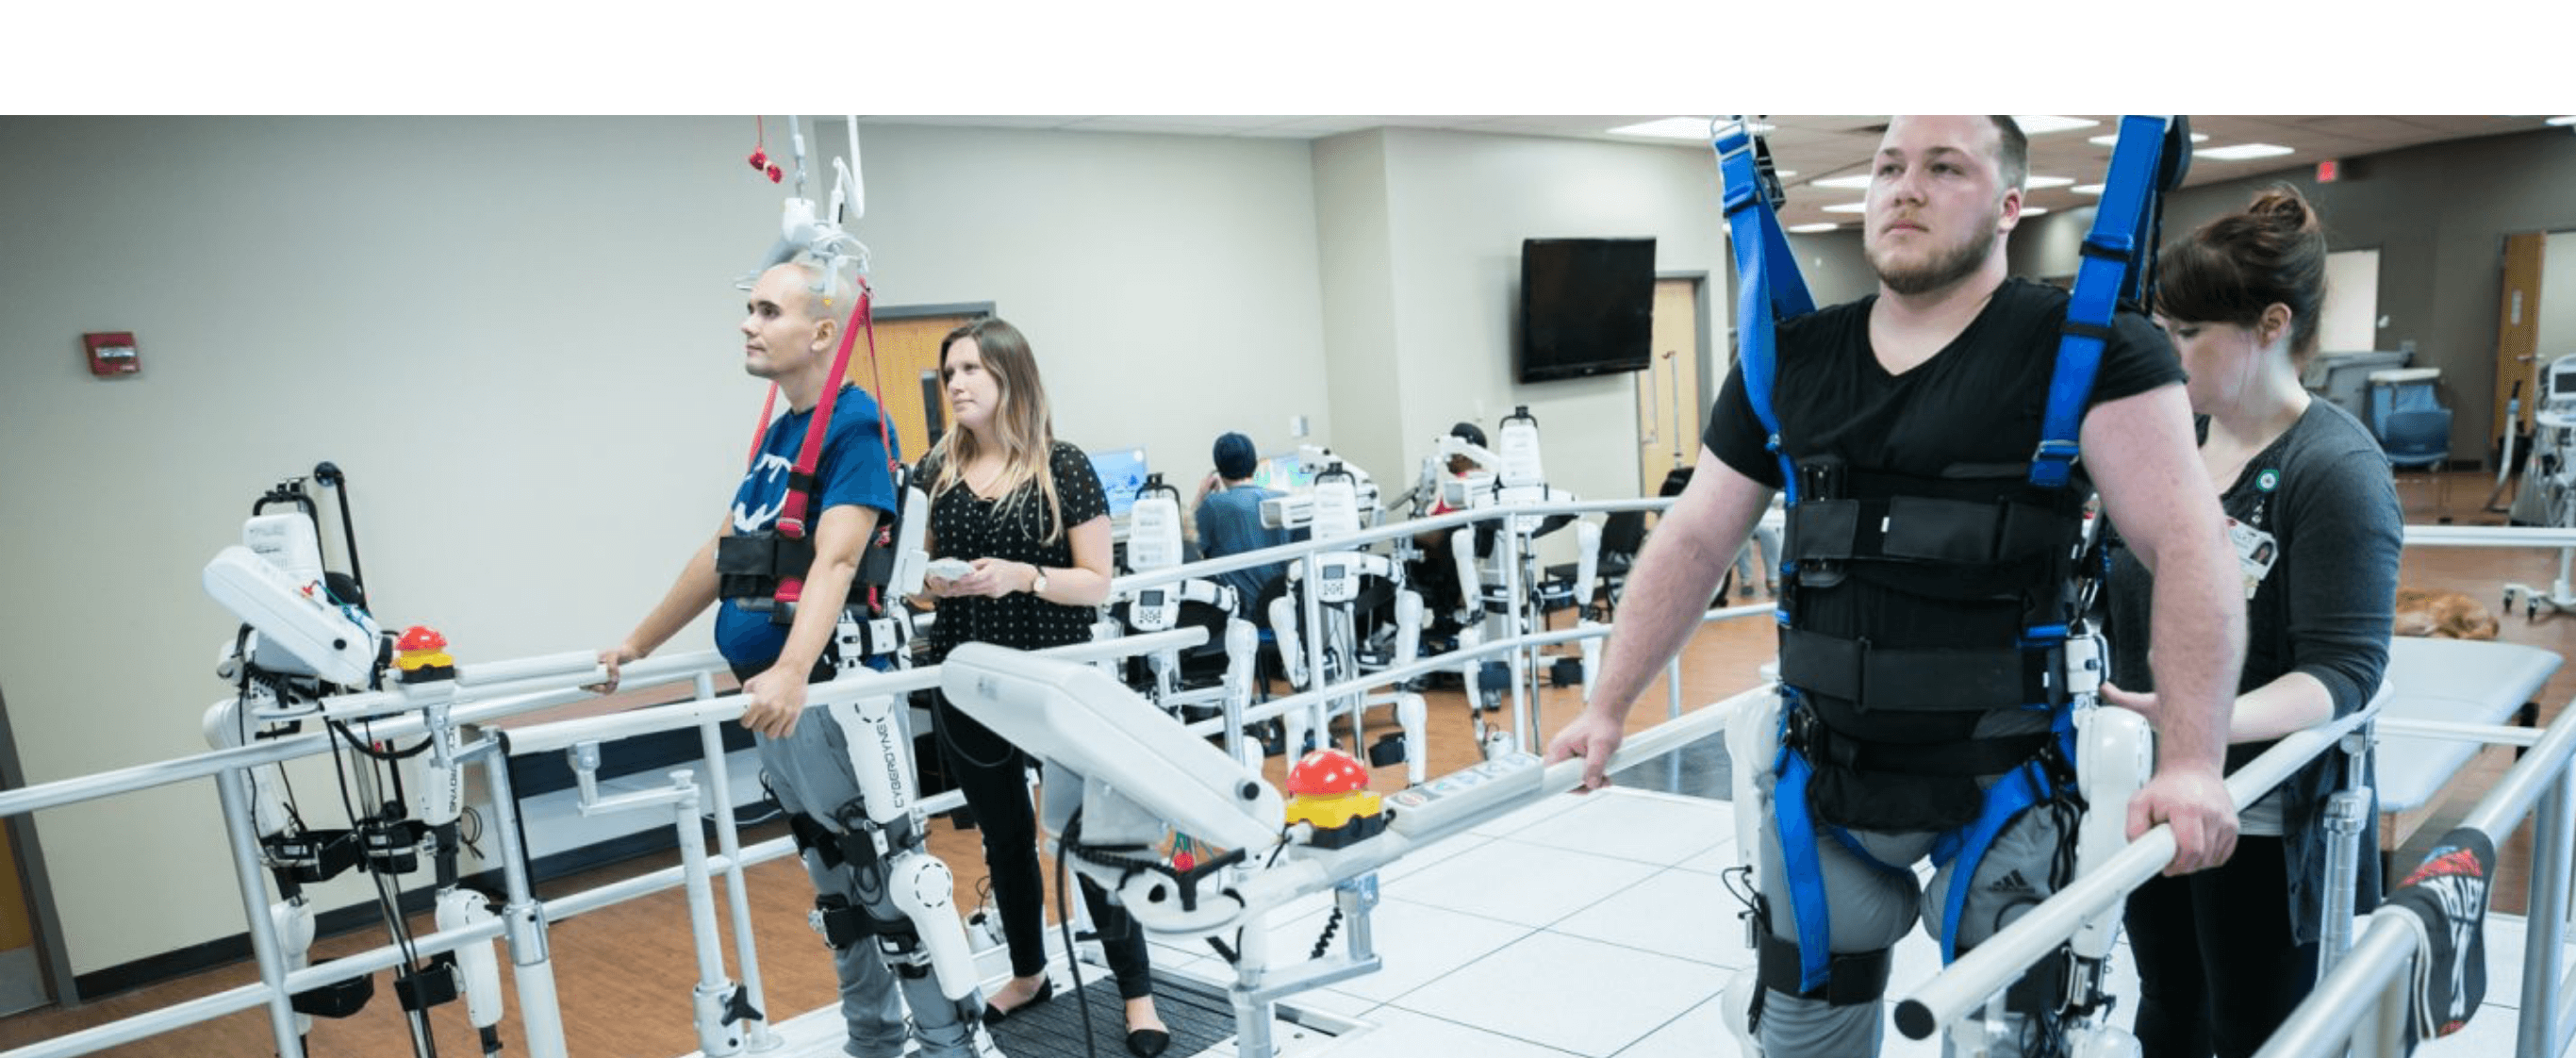 Patients using advanced technology for spinal cord injuries.